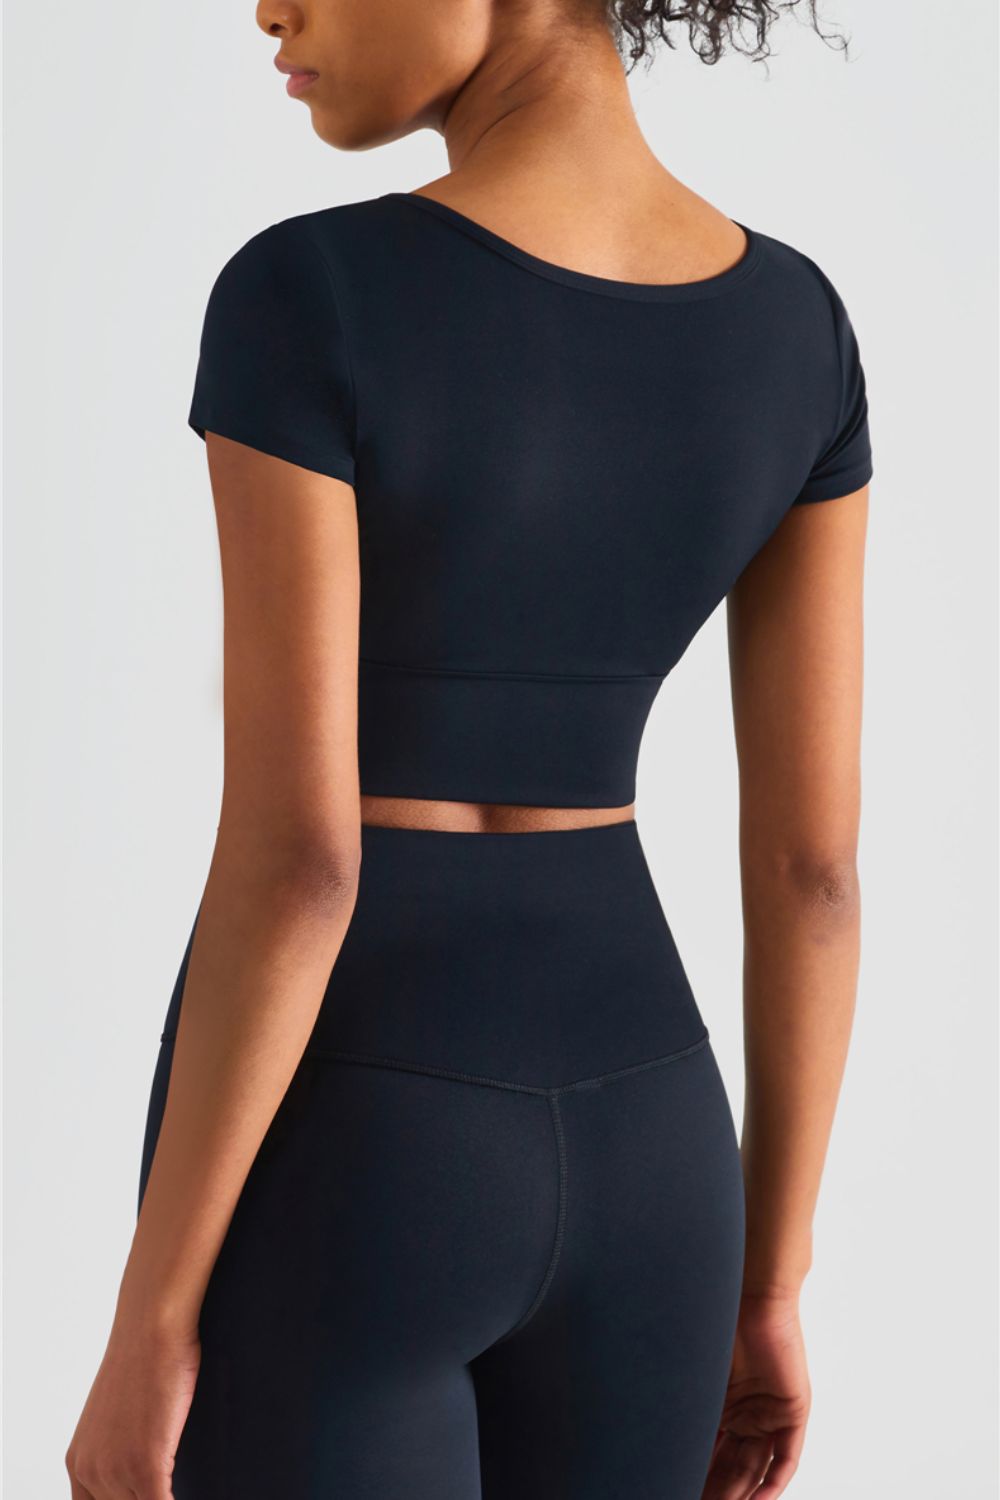 Notched Neck Short Sleeve Cropped Sports Top